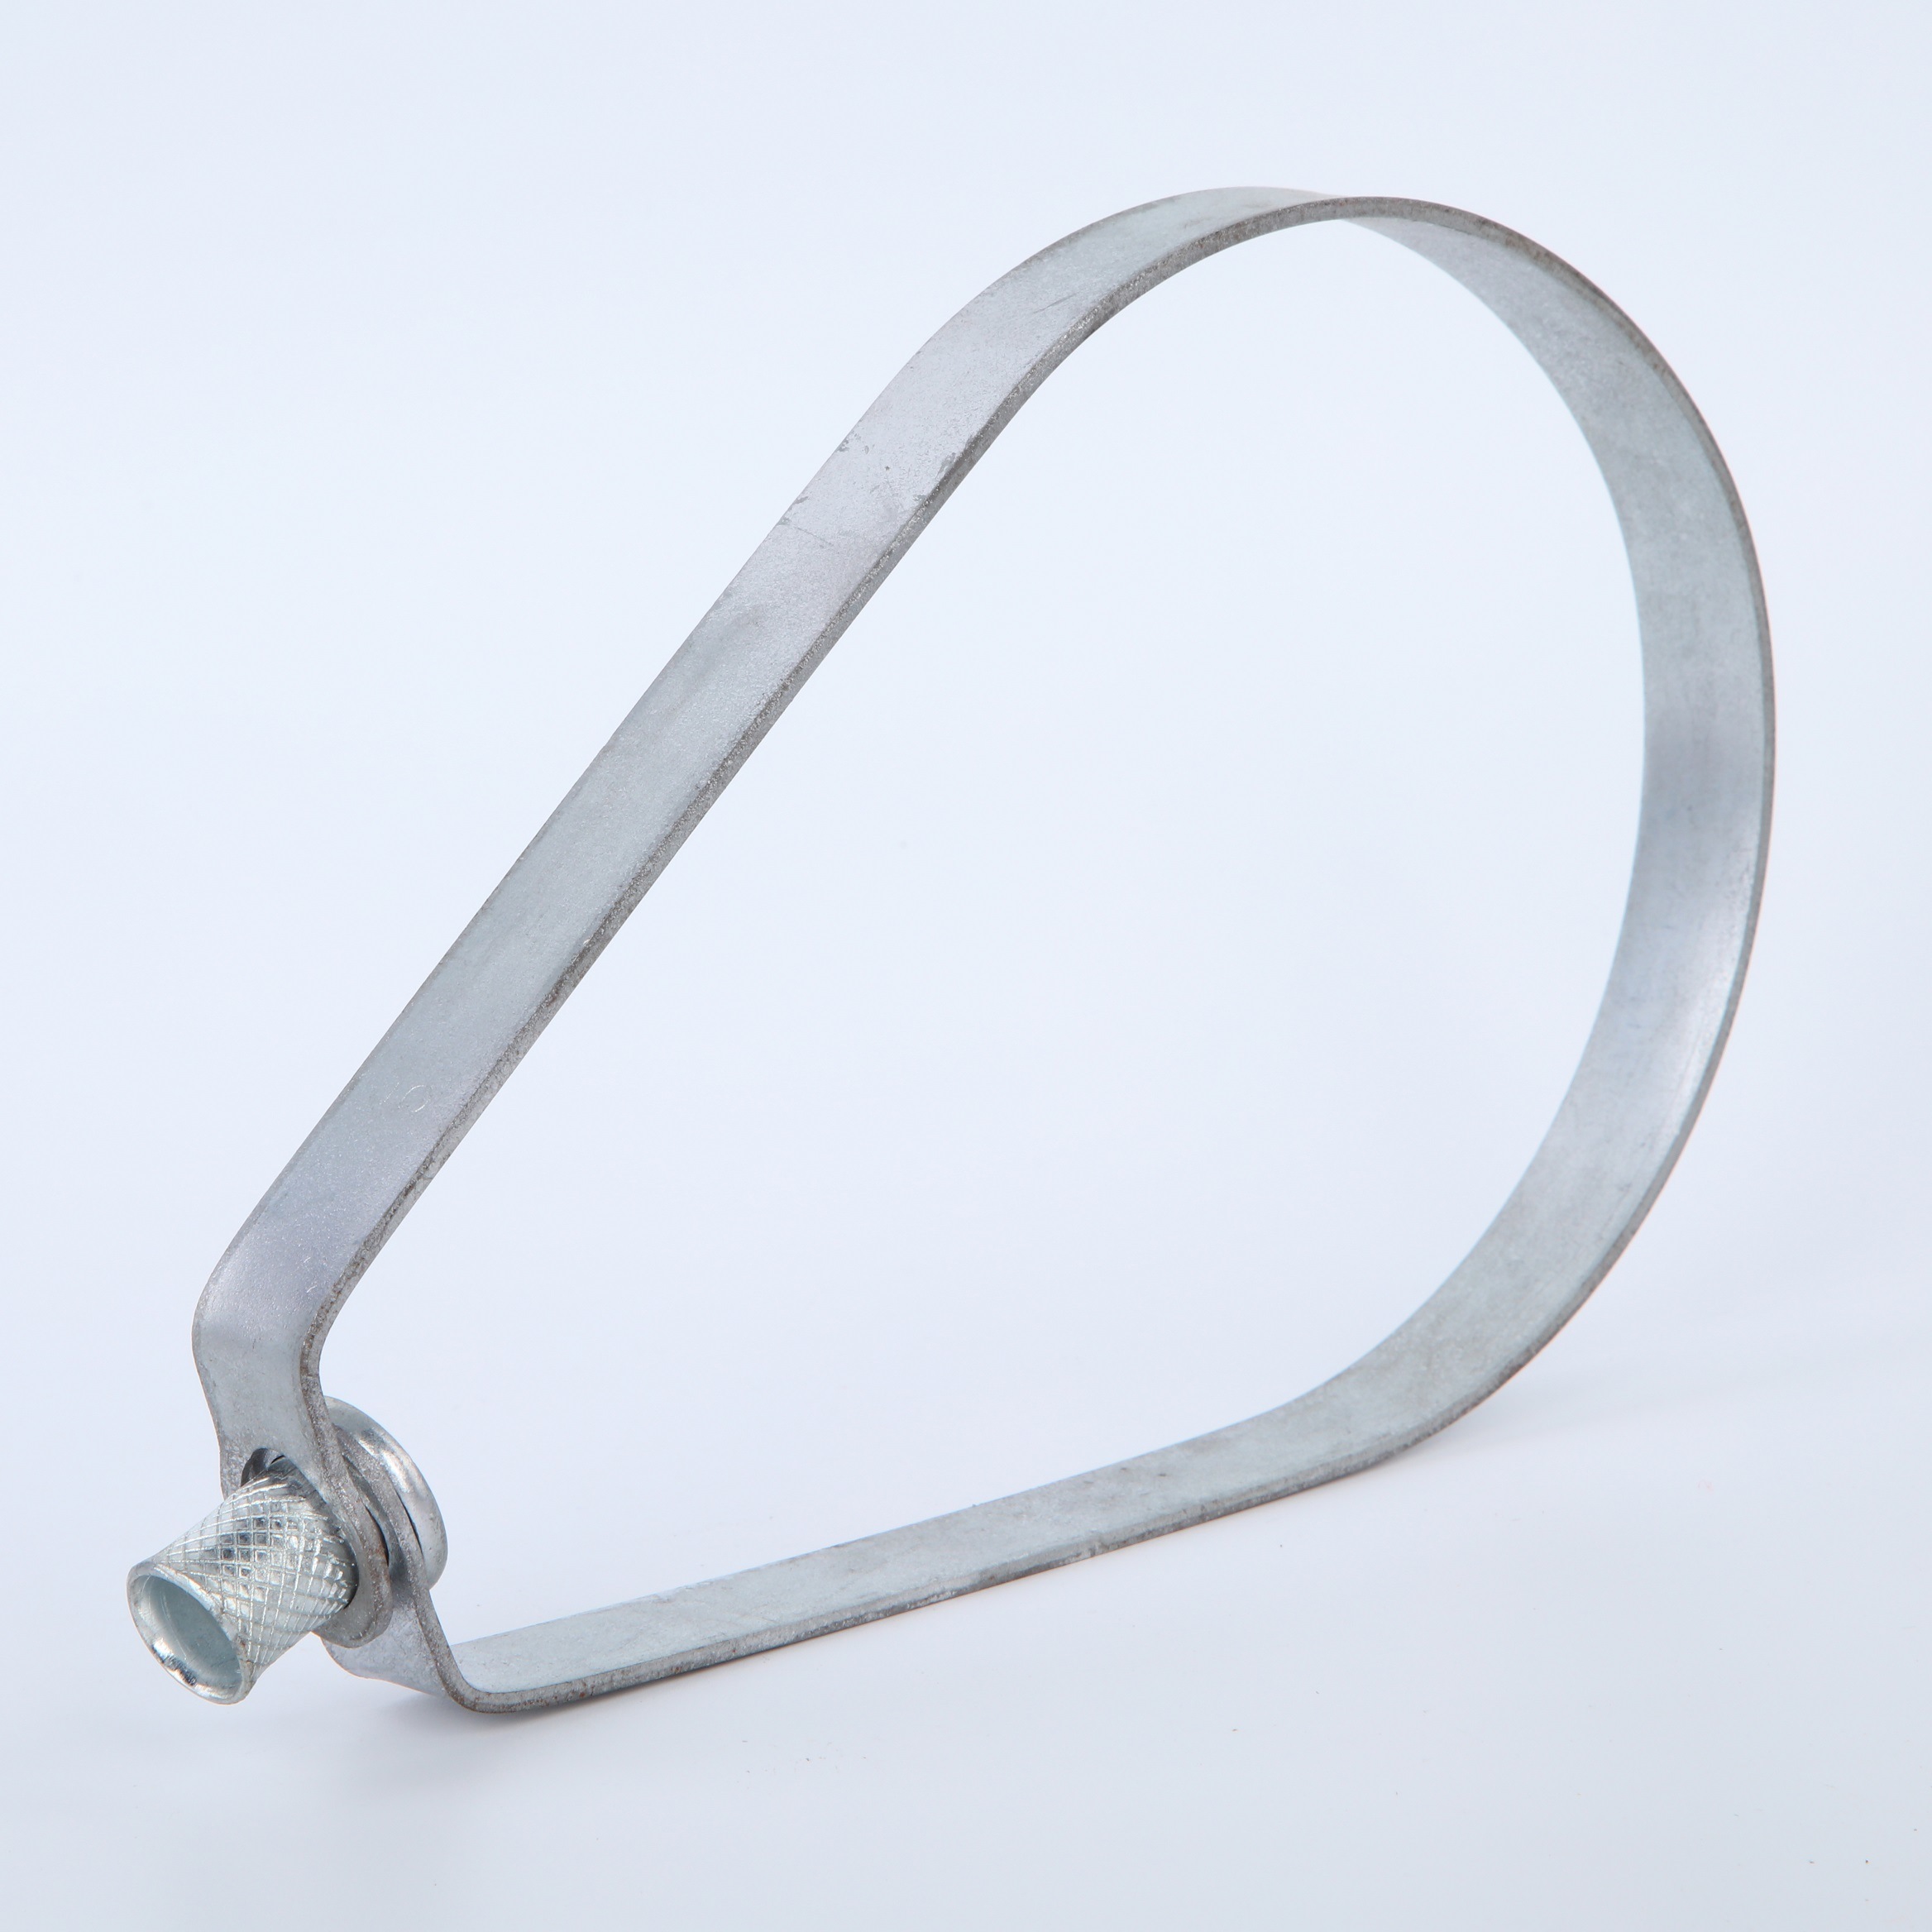 Swival Band Hanger Clamp 6 Inch